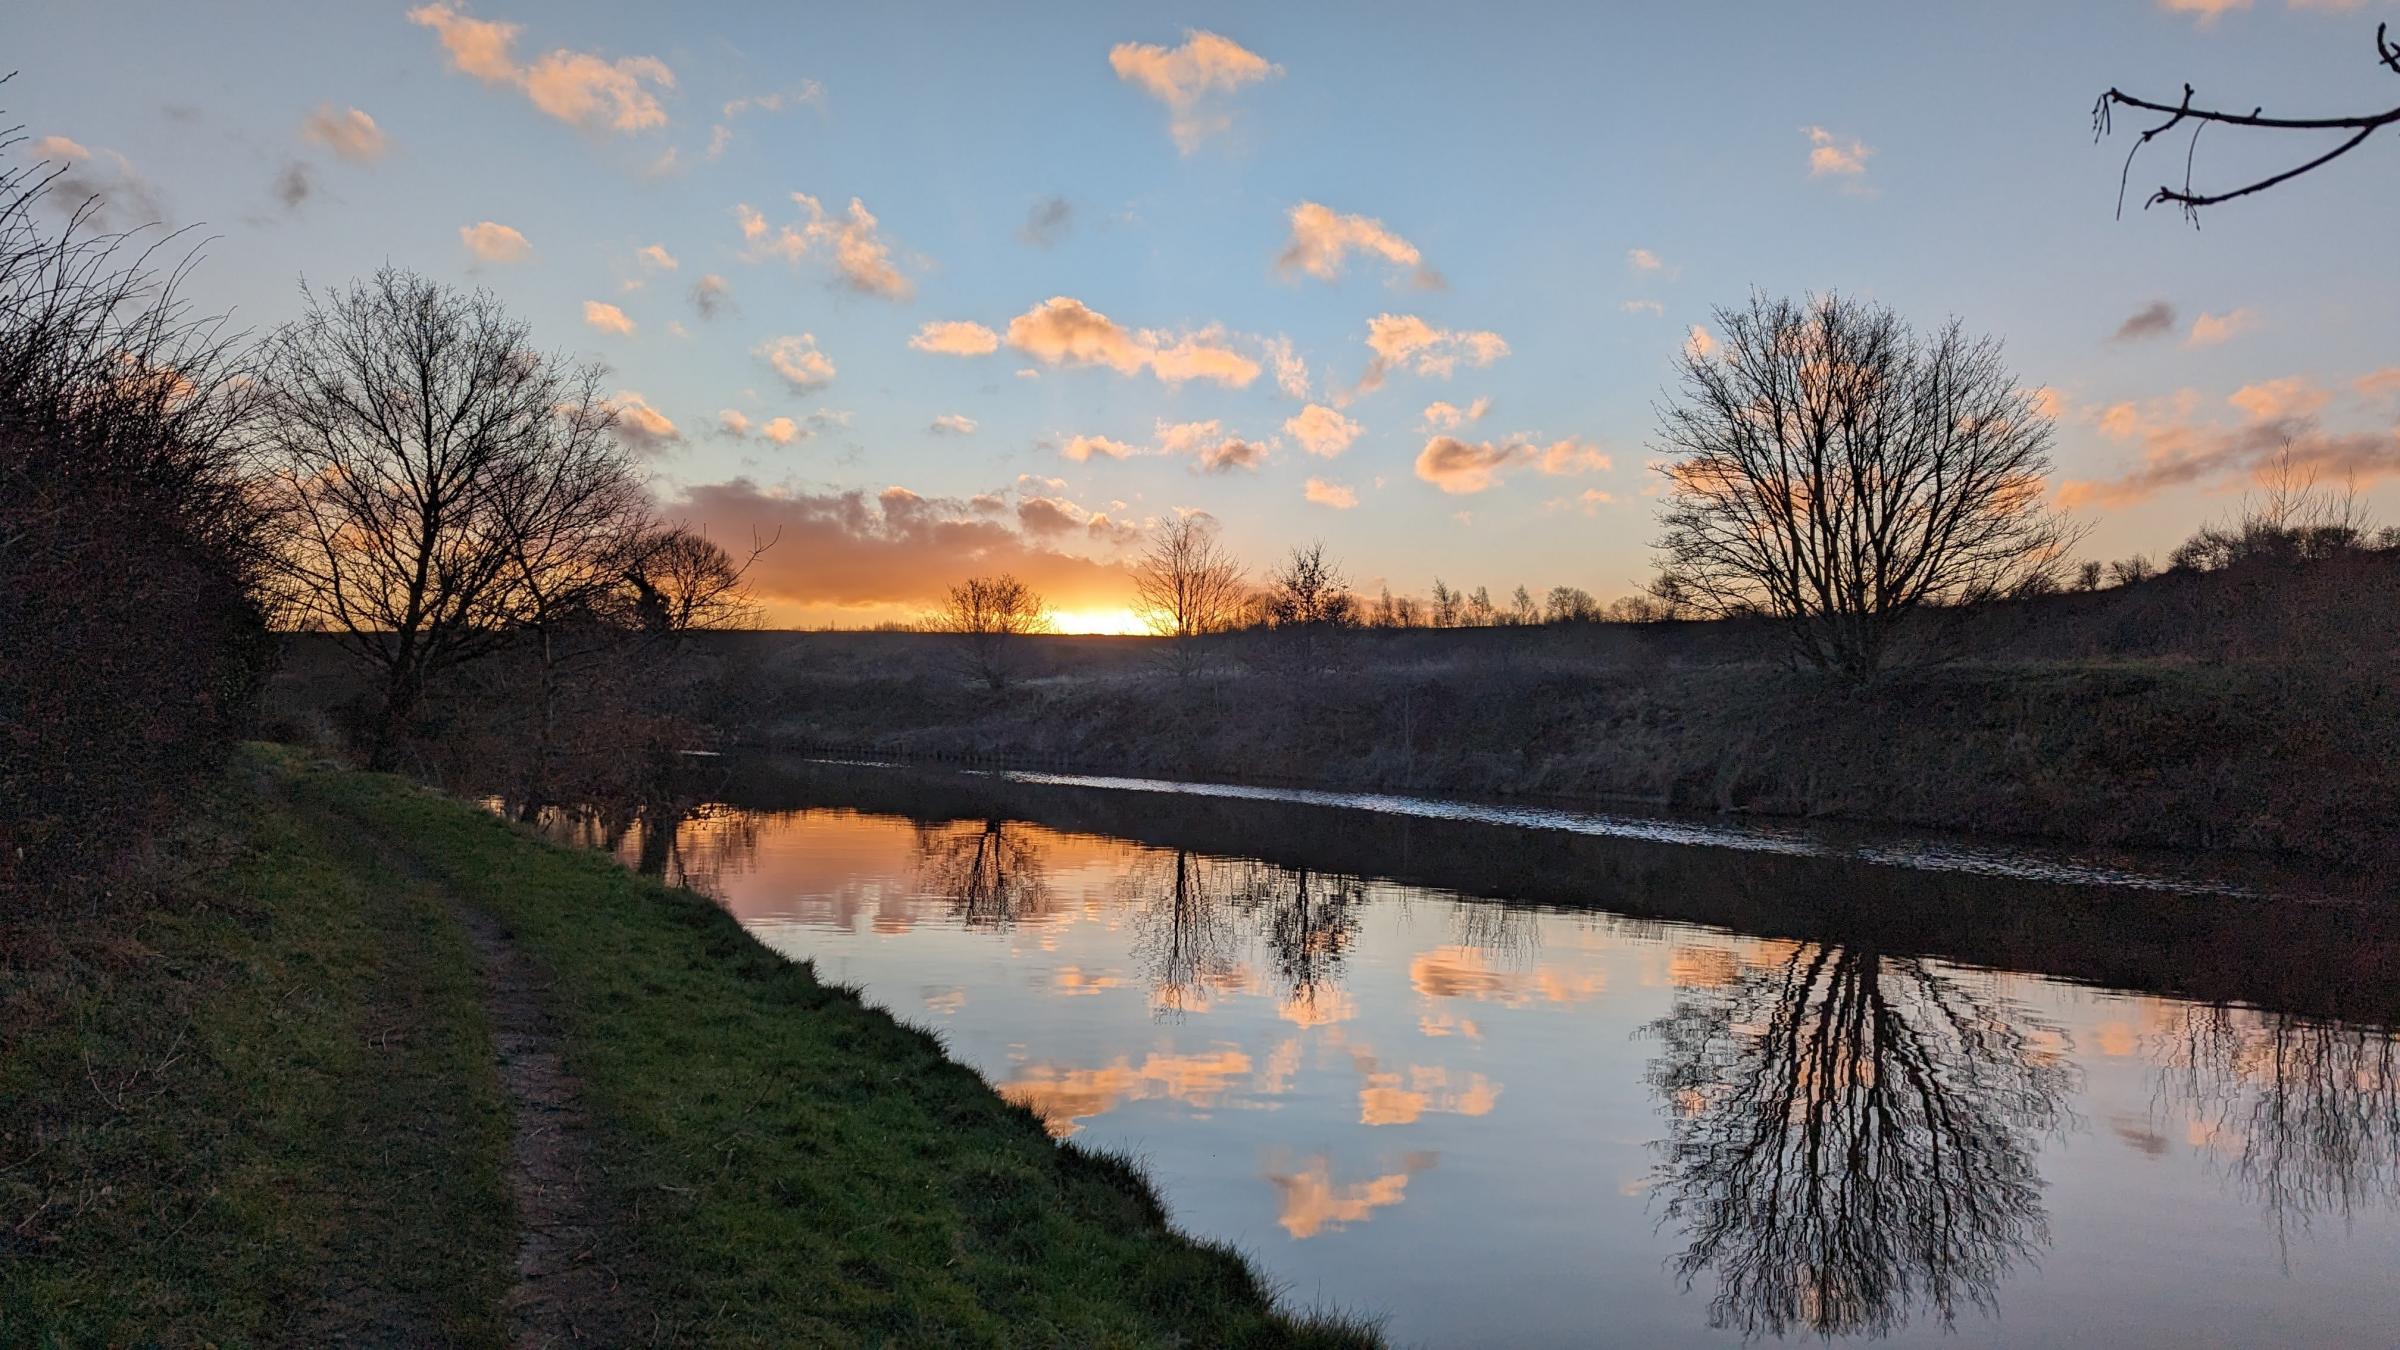 Sunrise and reflections on the river Weaver